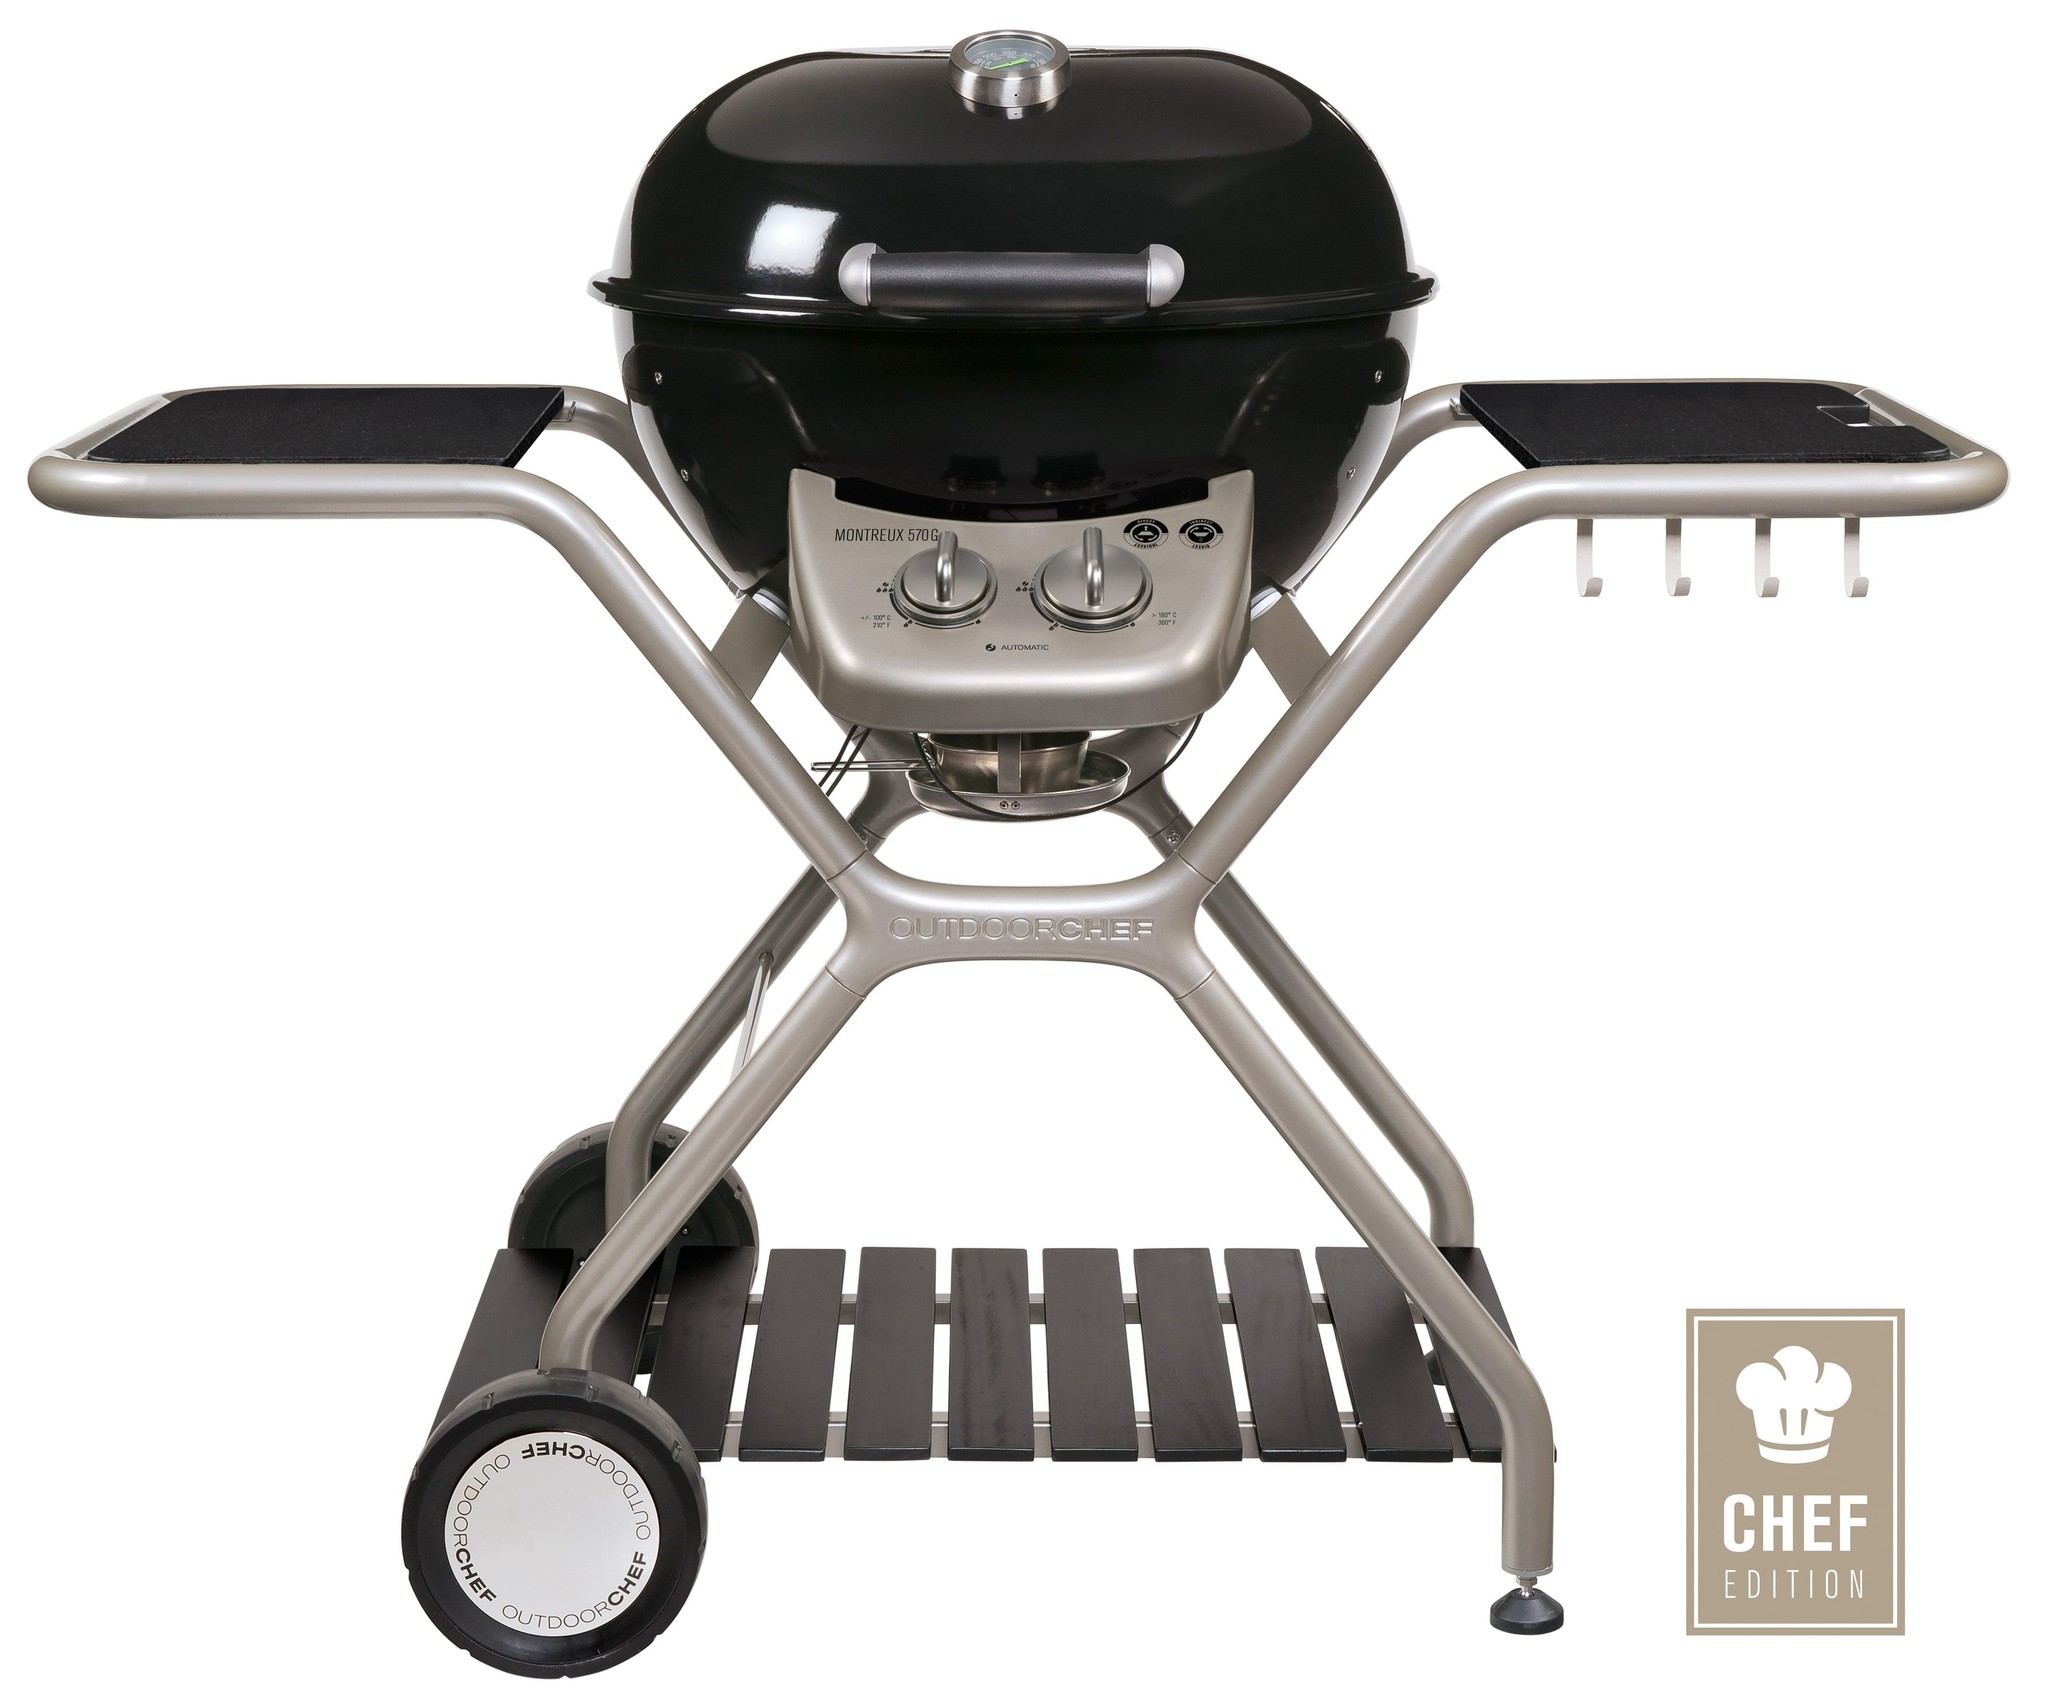 Met opzet wenkbrauw Barcelona Outdoorchef Montreux 570 G Chef Edition Gas barbecue - BBQtime.nl